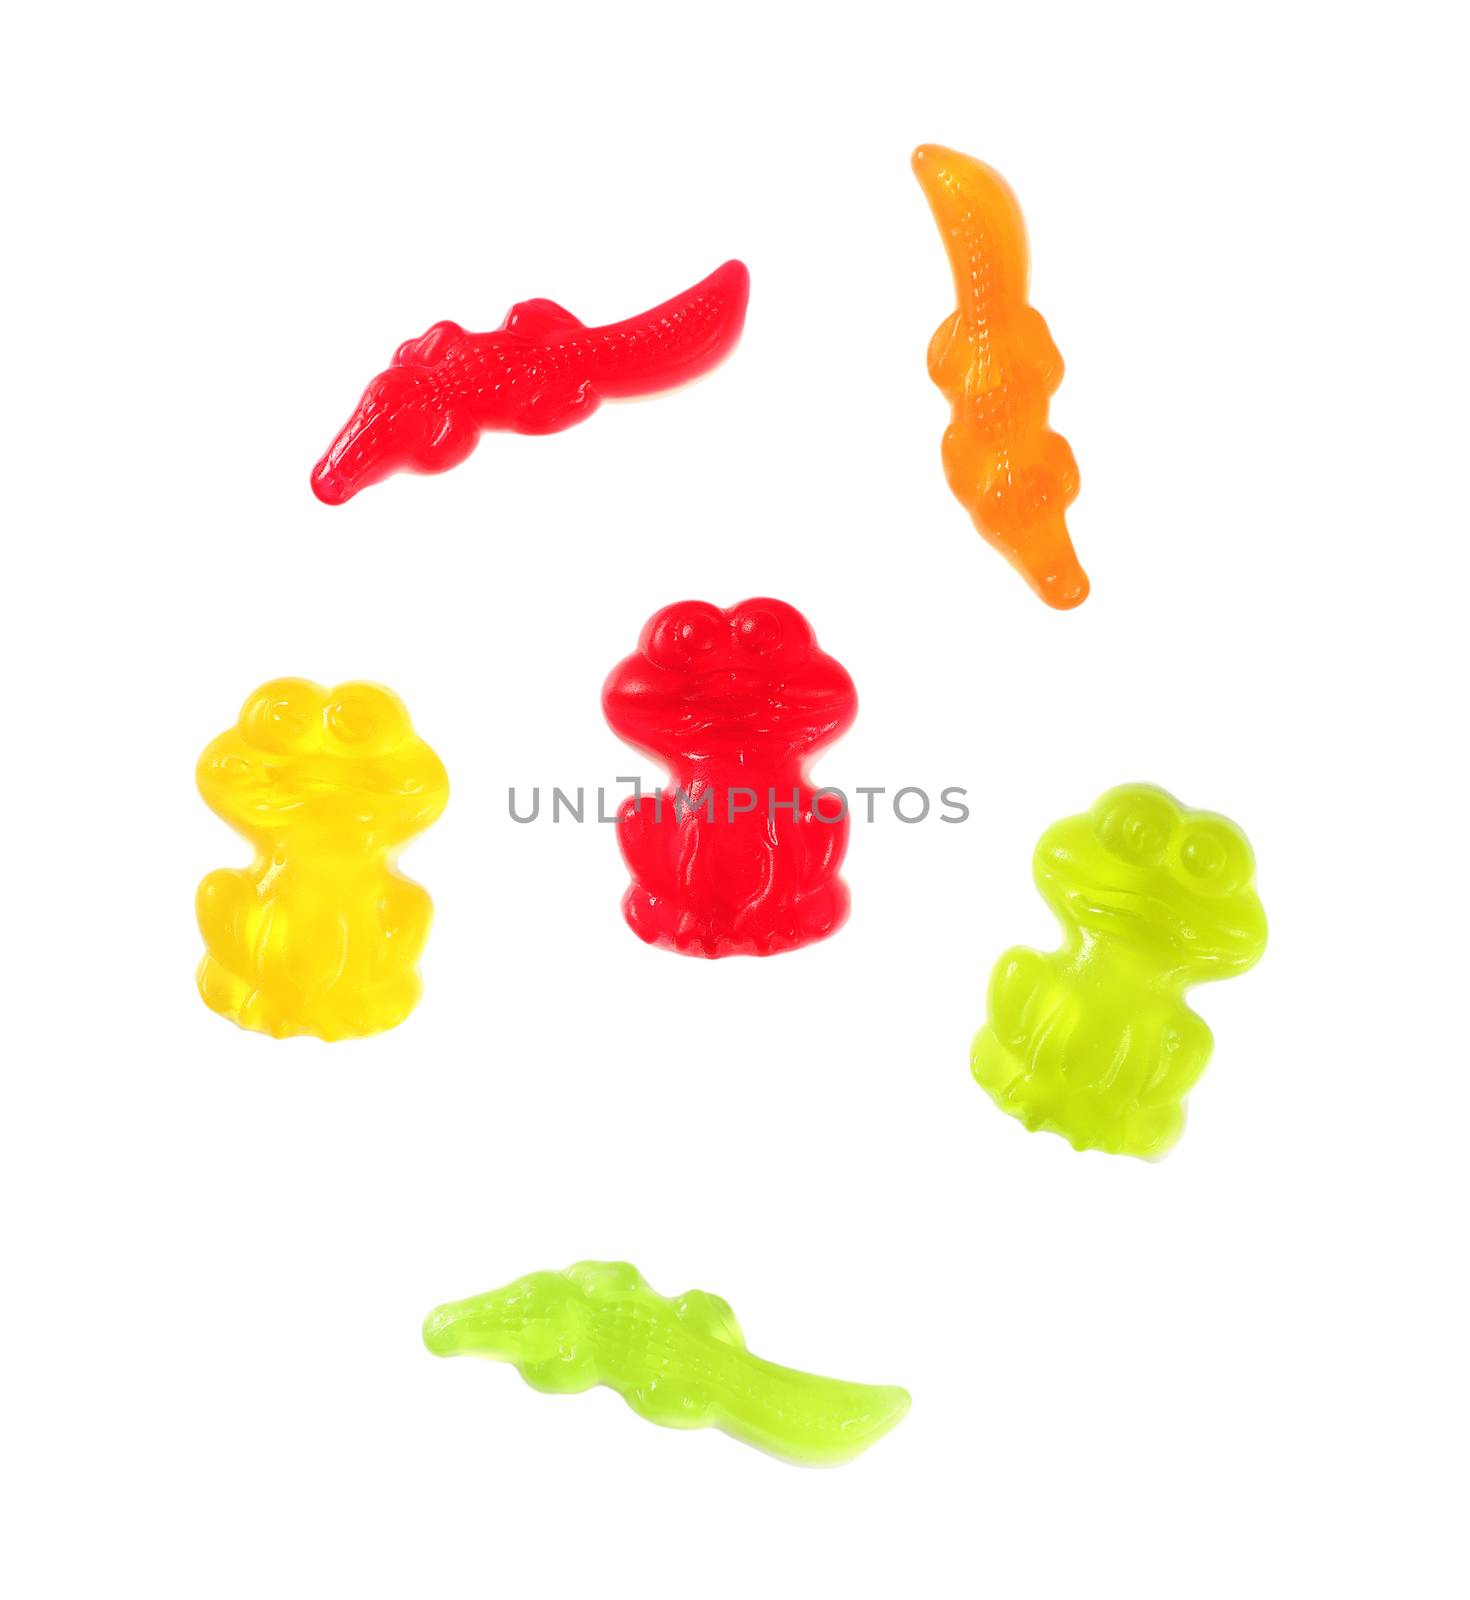 colorful gummy candies in the shape of animals on white background